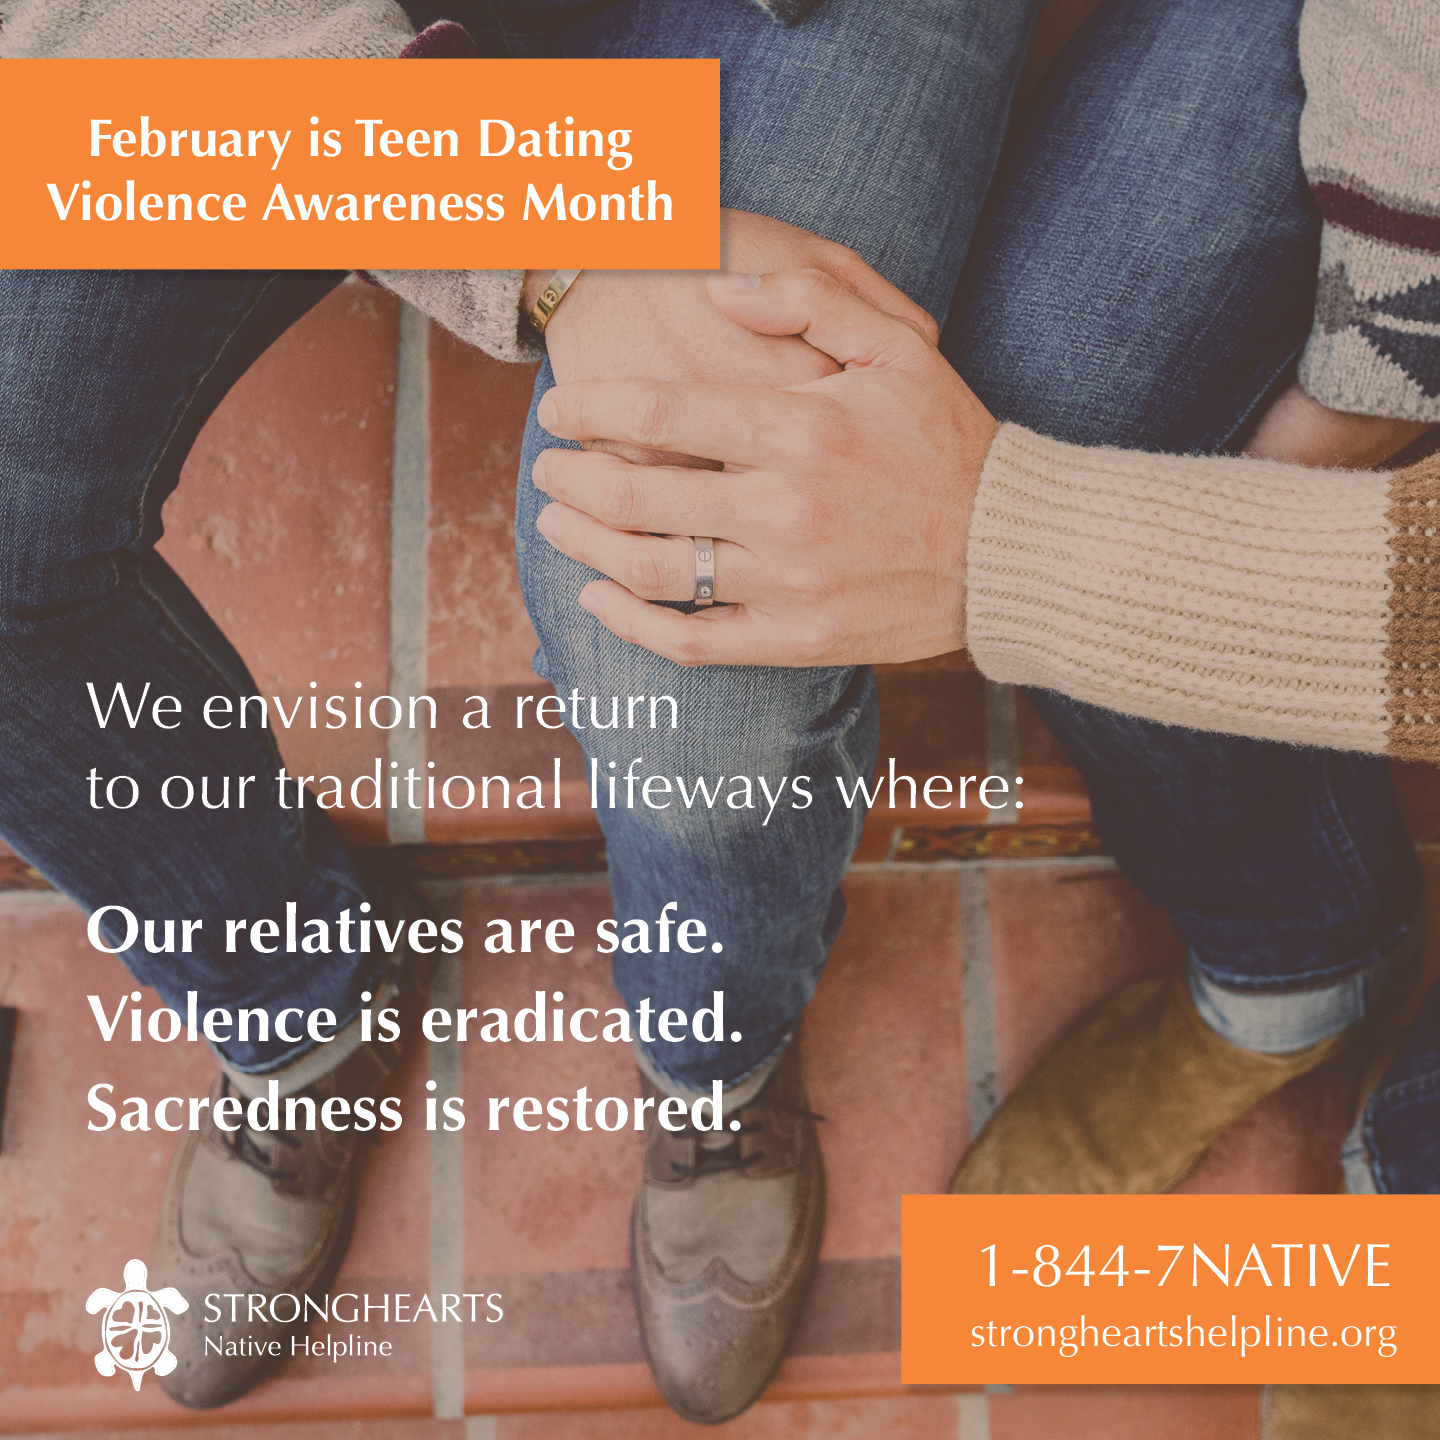 StrongHearts Native Helpline: Dating violence is never okay, even among our youth